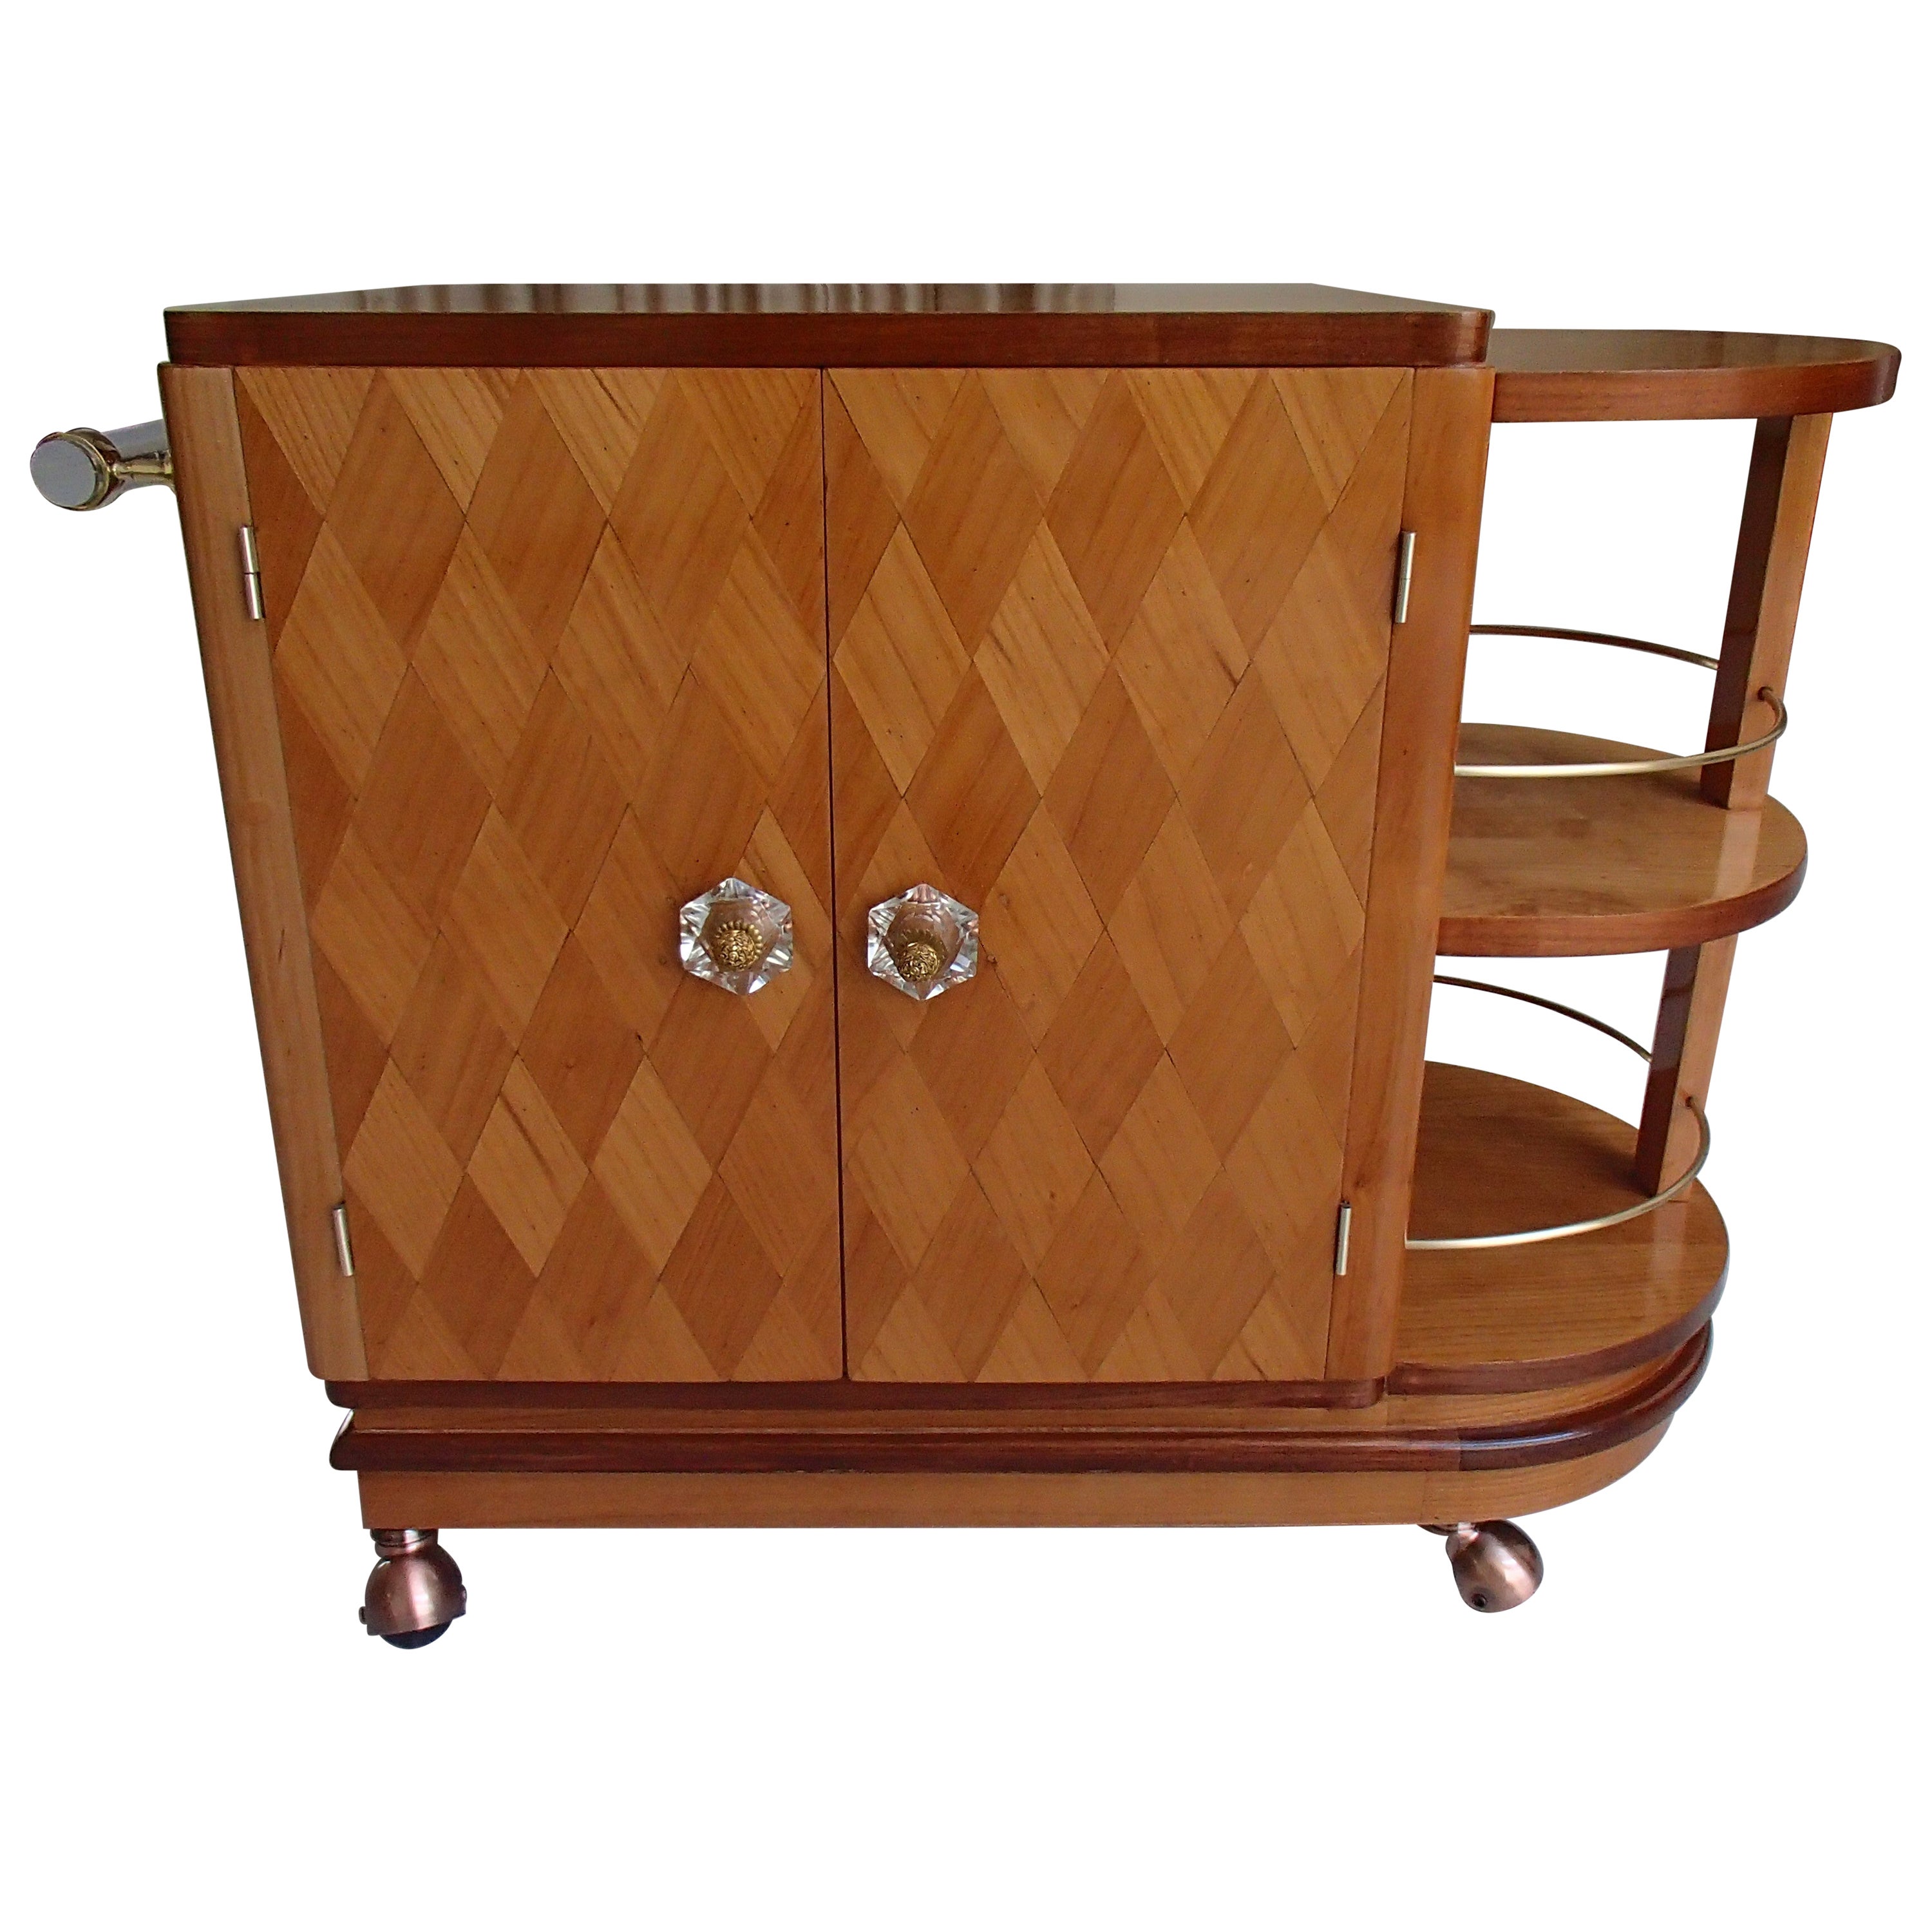 Art Deco Trolley Bar with 2 Doors and Bottle Compartment on Copper Wheels